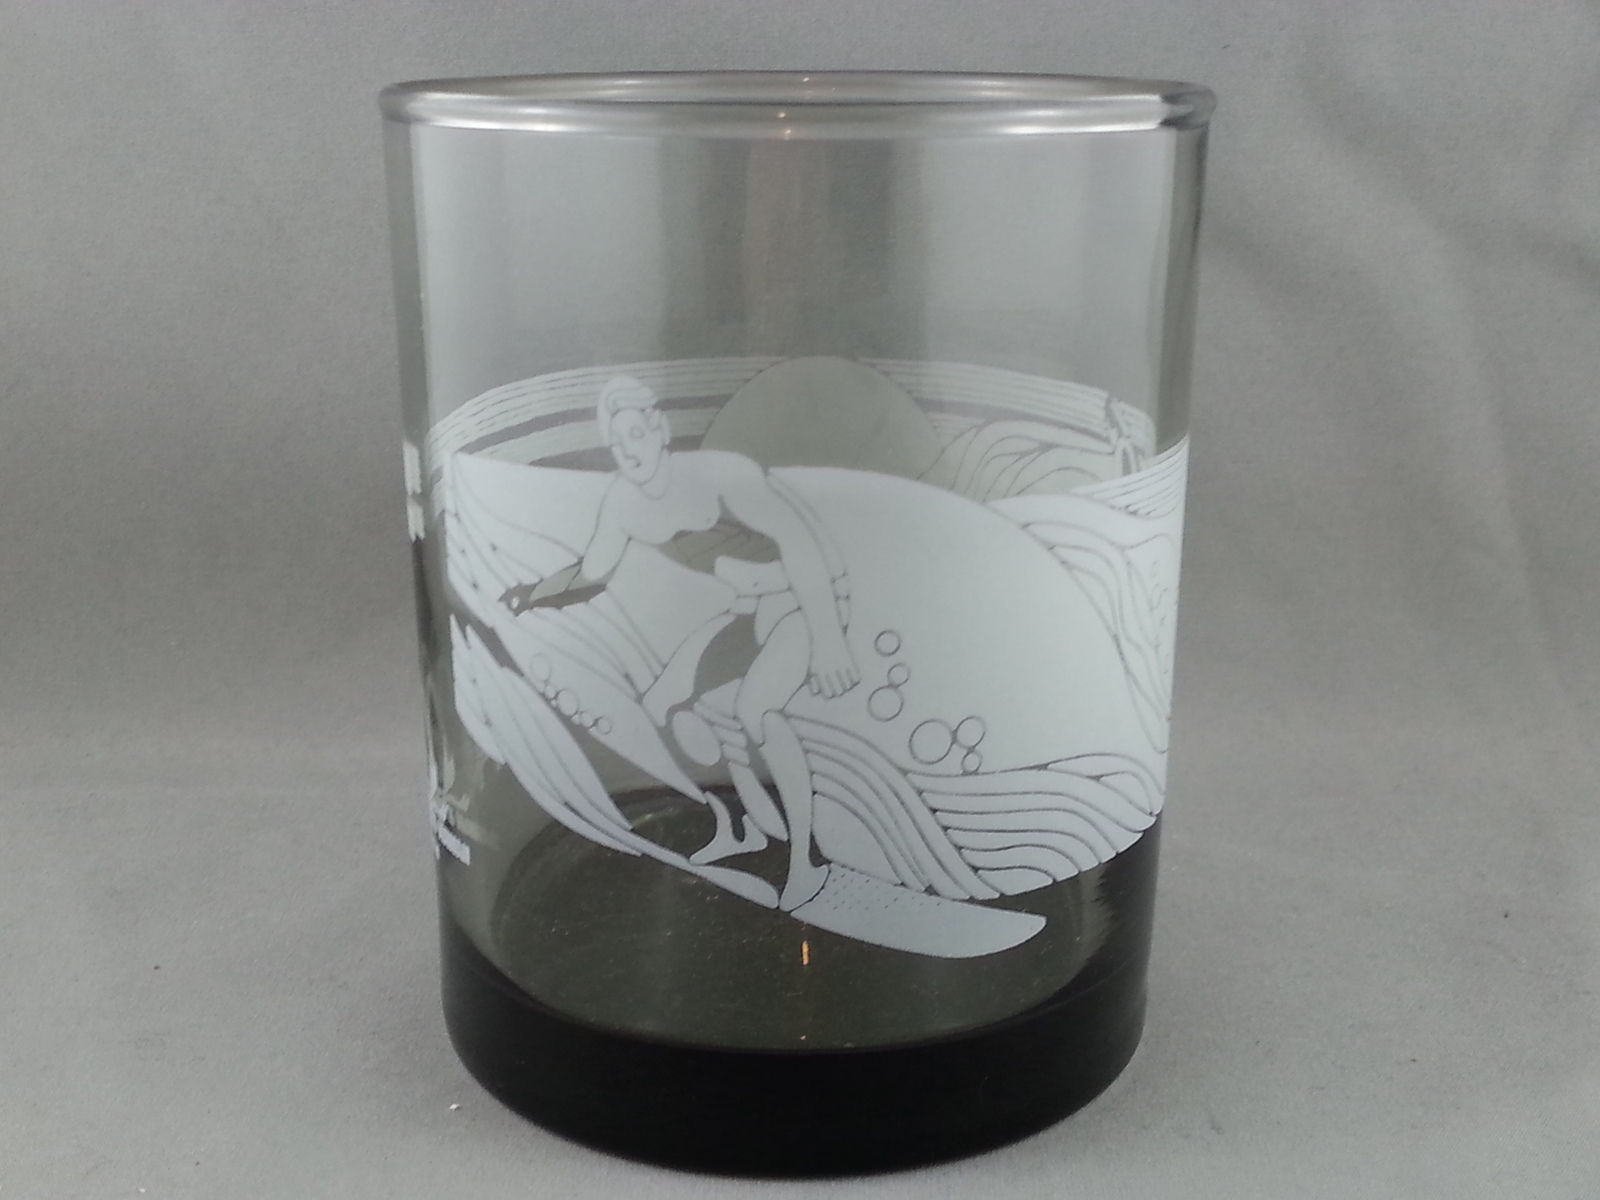 Primary image for 1970s Mc Donald's Hawaii Cocktail Glass - Surfing Theme - Etched by Libbey